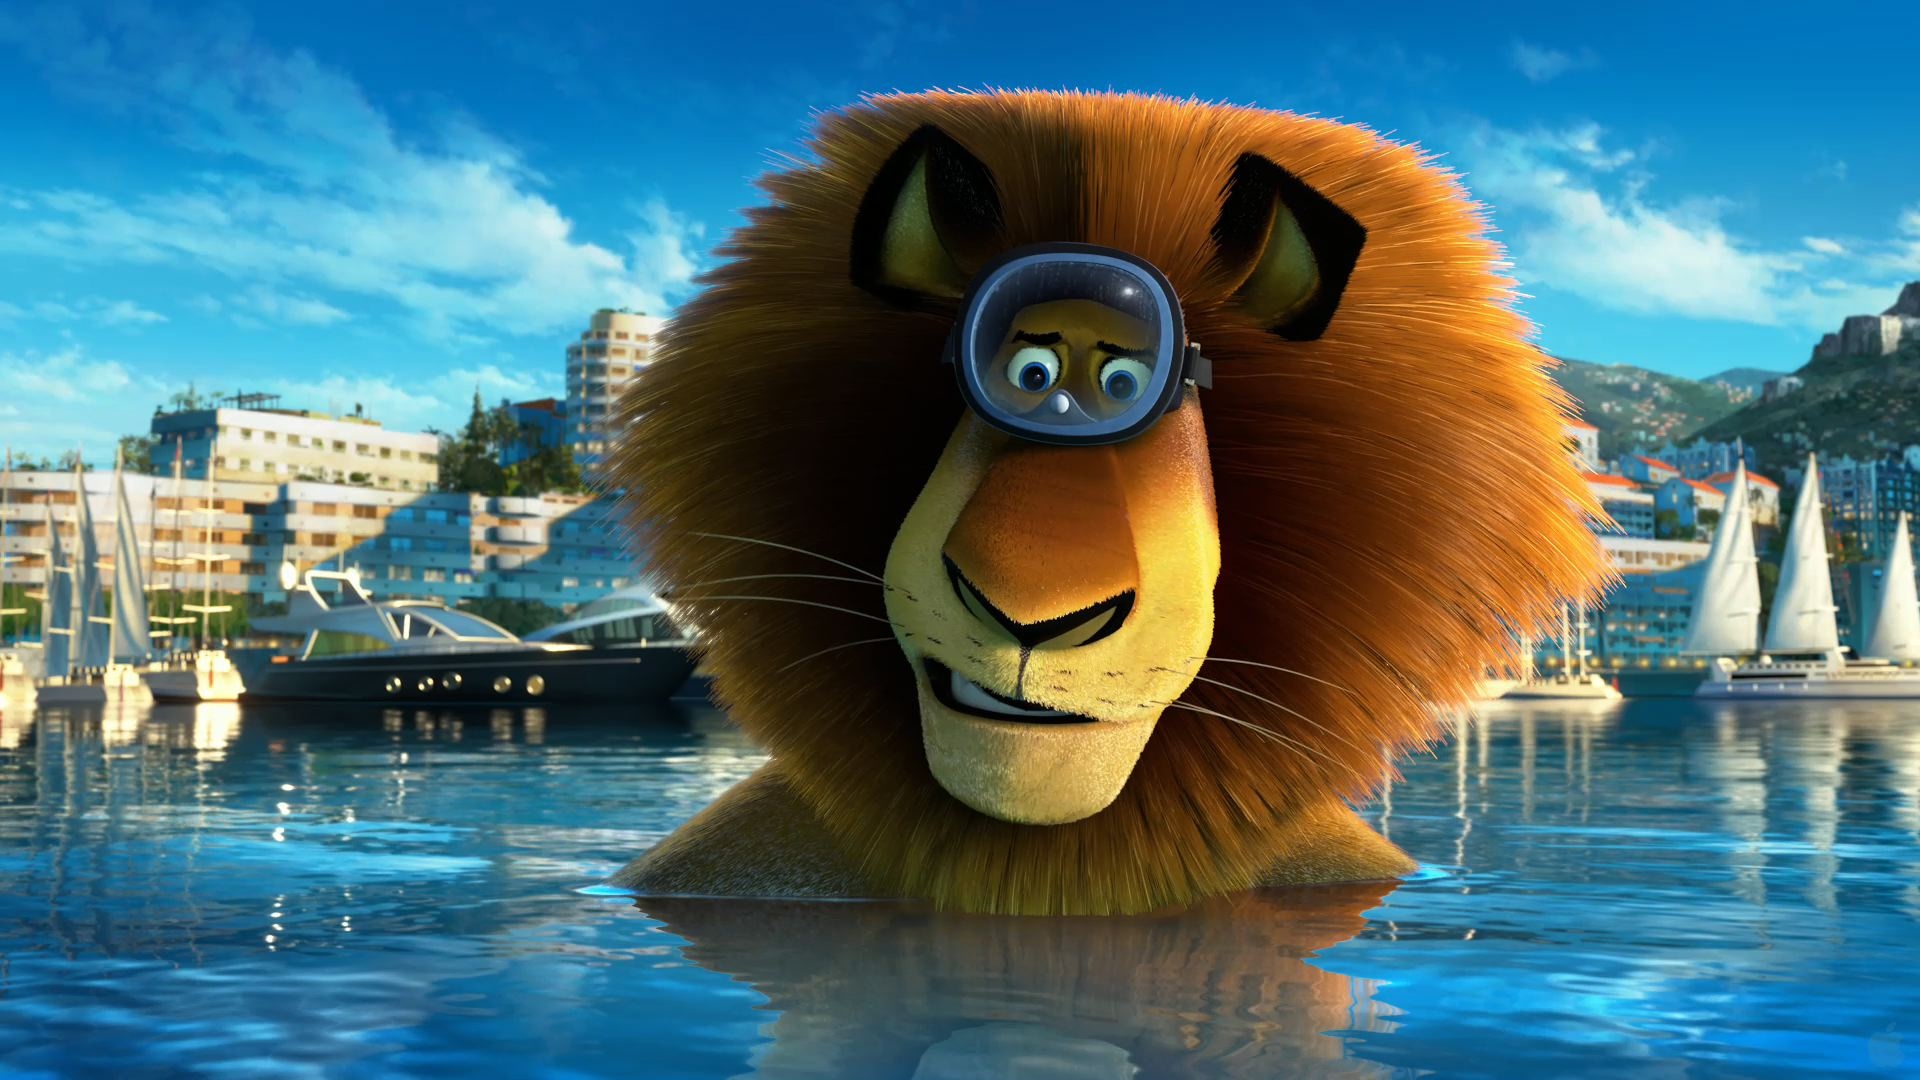 DreamWorks: Madagascar 3: Europe's Most Wanted, Alex the Lion, Computer-animated adventure, 2012. 1920x1080 Full HD Background.